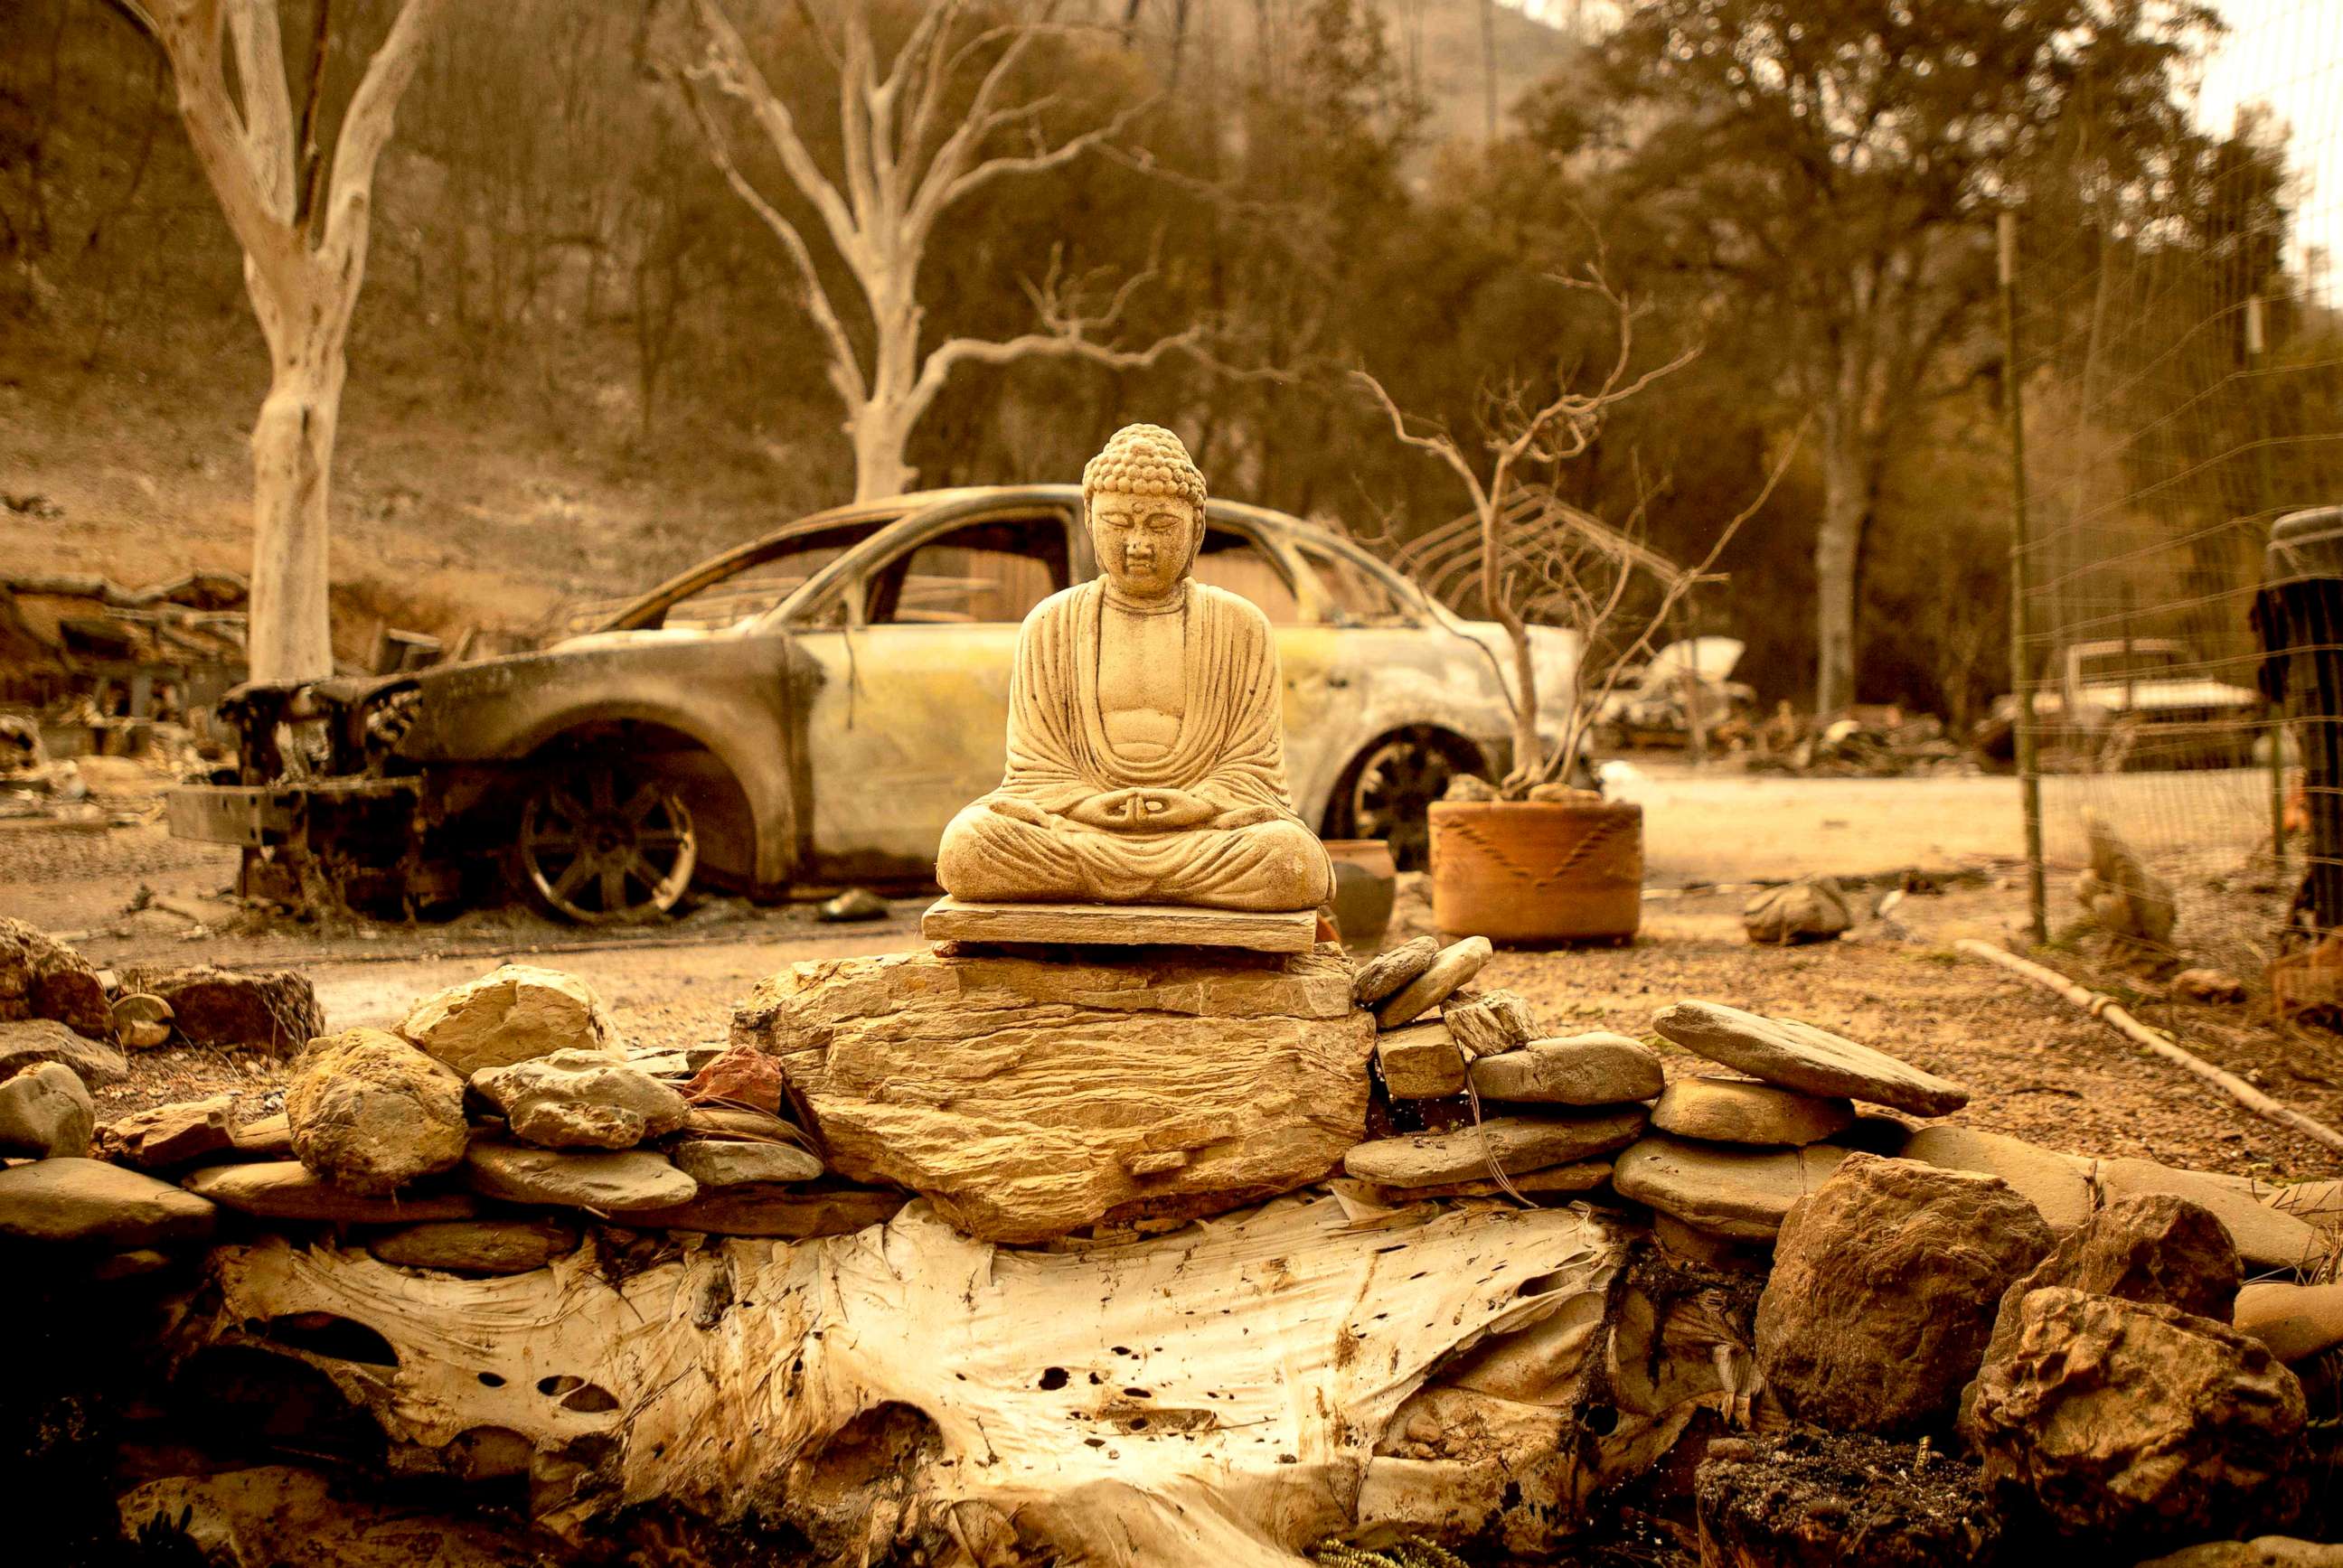 PHOTO: A statue of the Buddha is seen at a burned home near Clearlake Oaks, California, Aug. 7, 2018. The raging Mendocino Complex fire comprising twin blazes in the western state's north has now ravaged more than 290,000 acres.